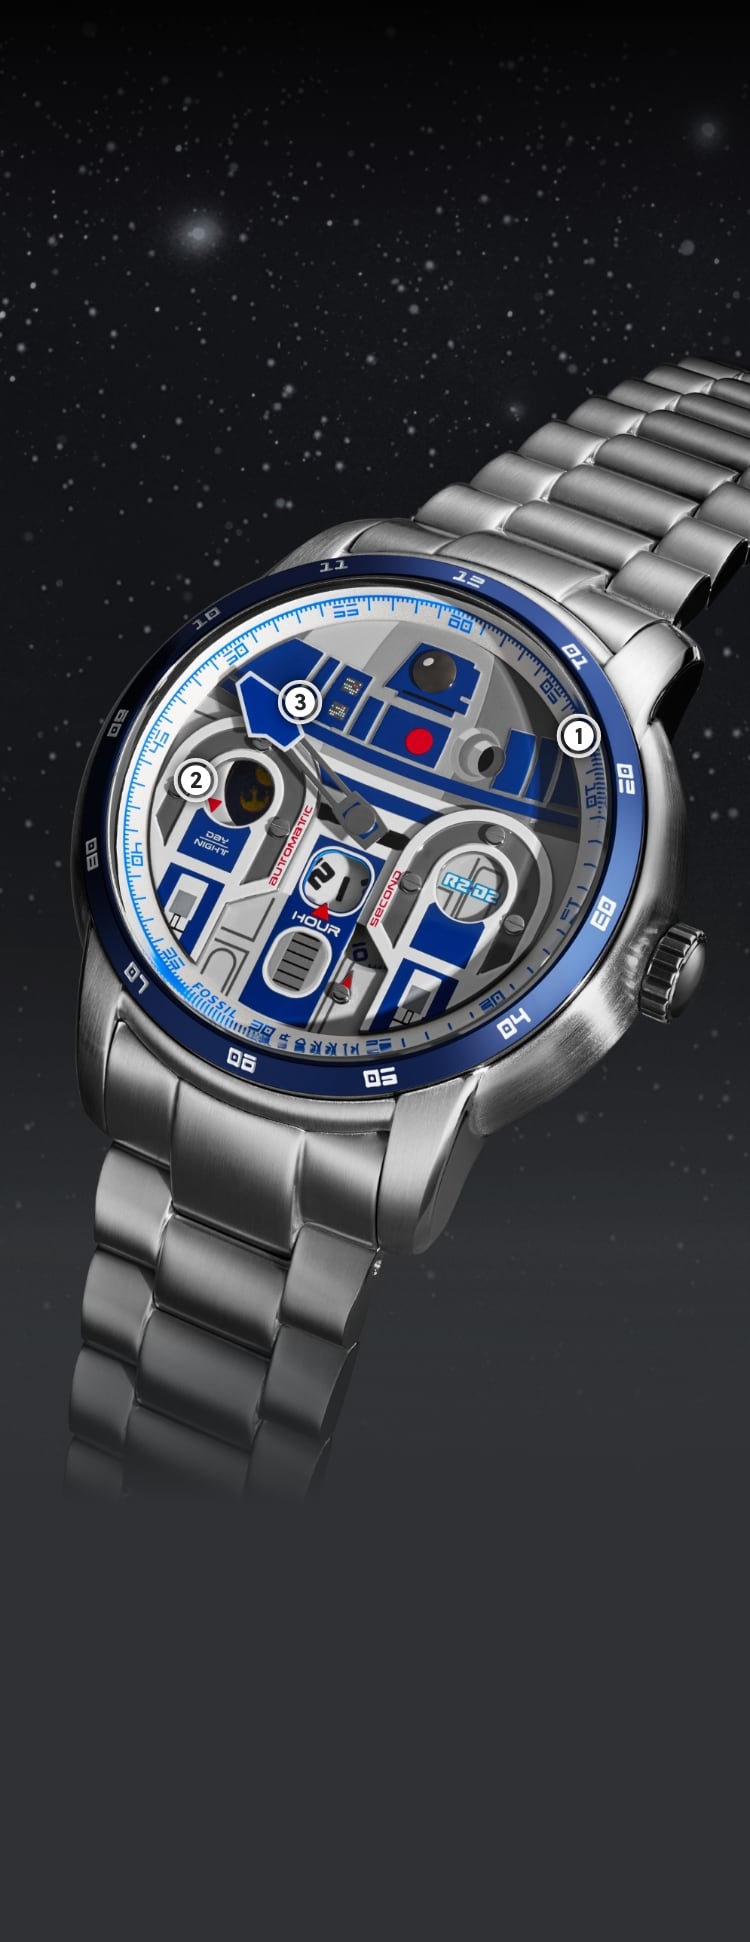 A close-up shot of a silver-tone watch with a dimensional appliqué of R2-D2 on the dial